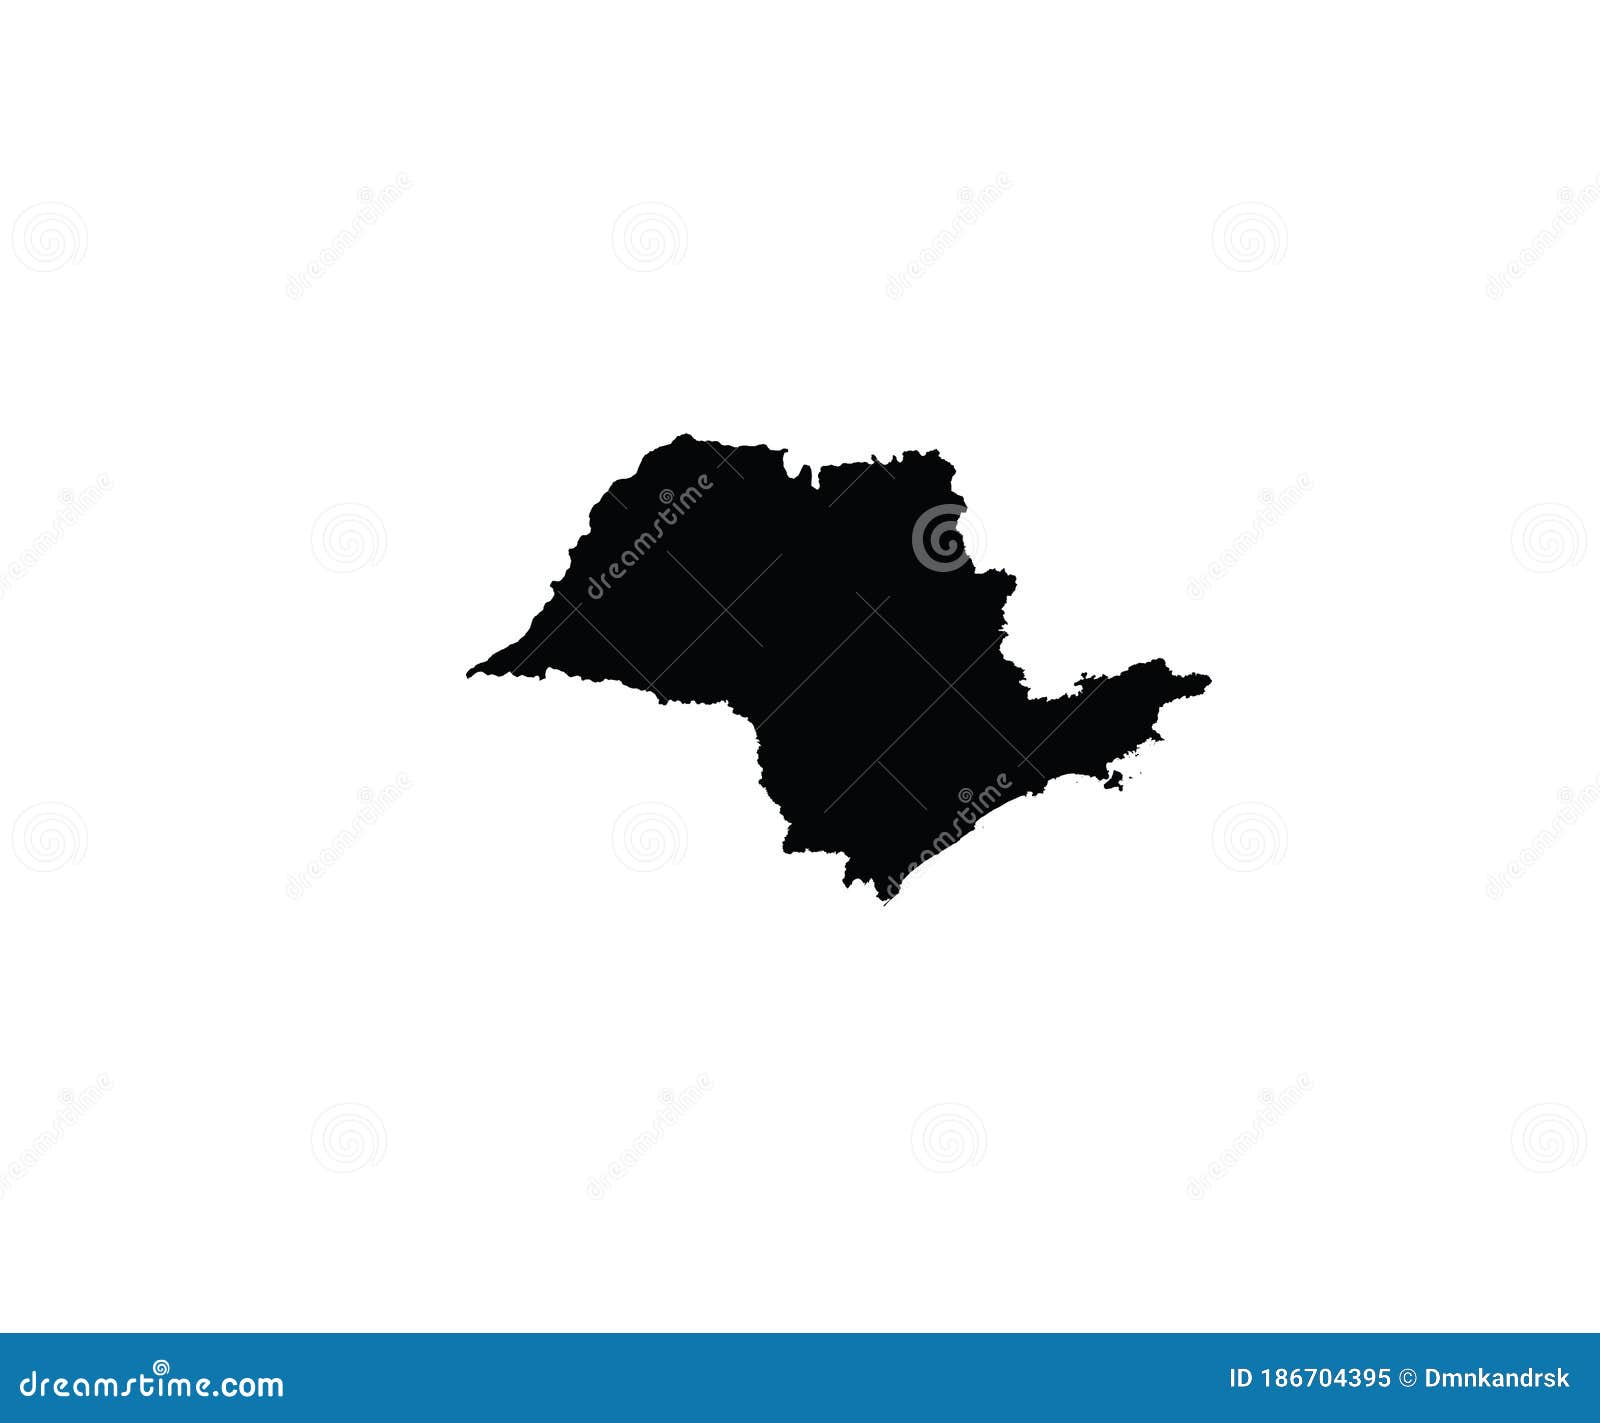 sao paolo outline map brazil state region